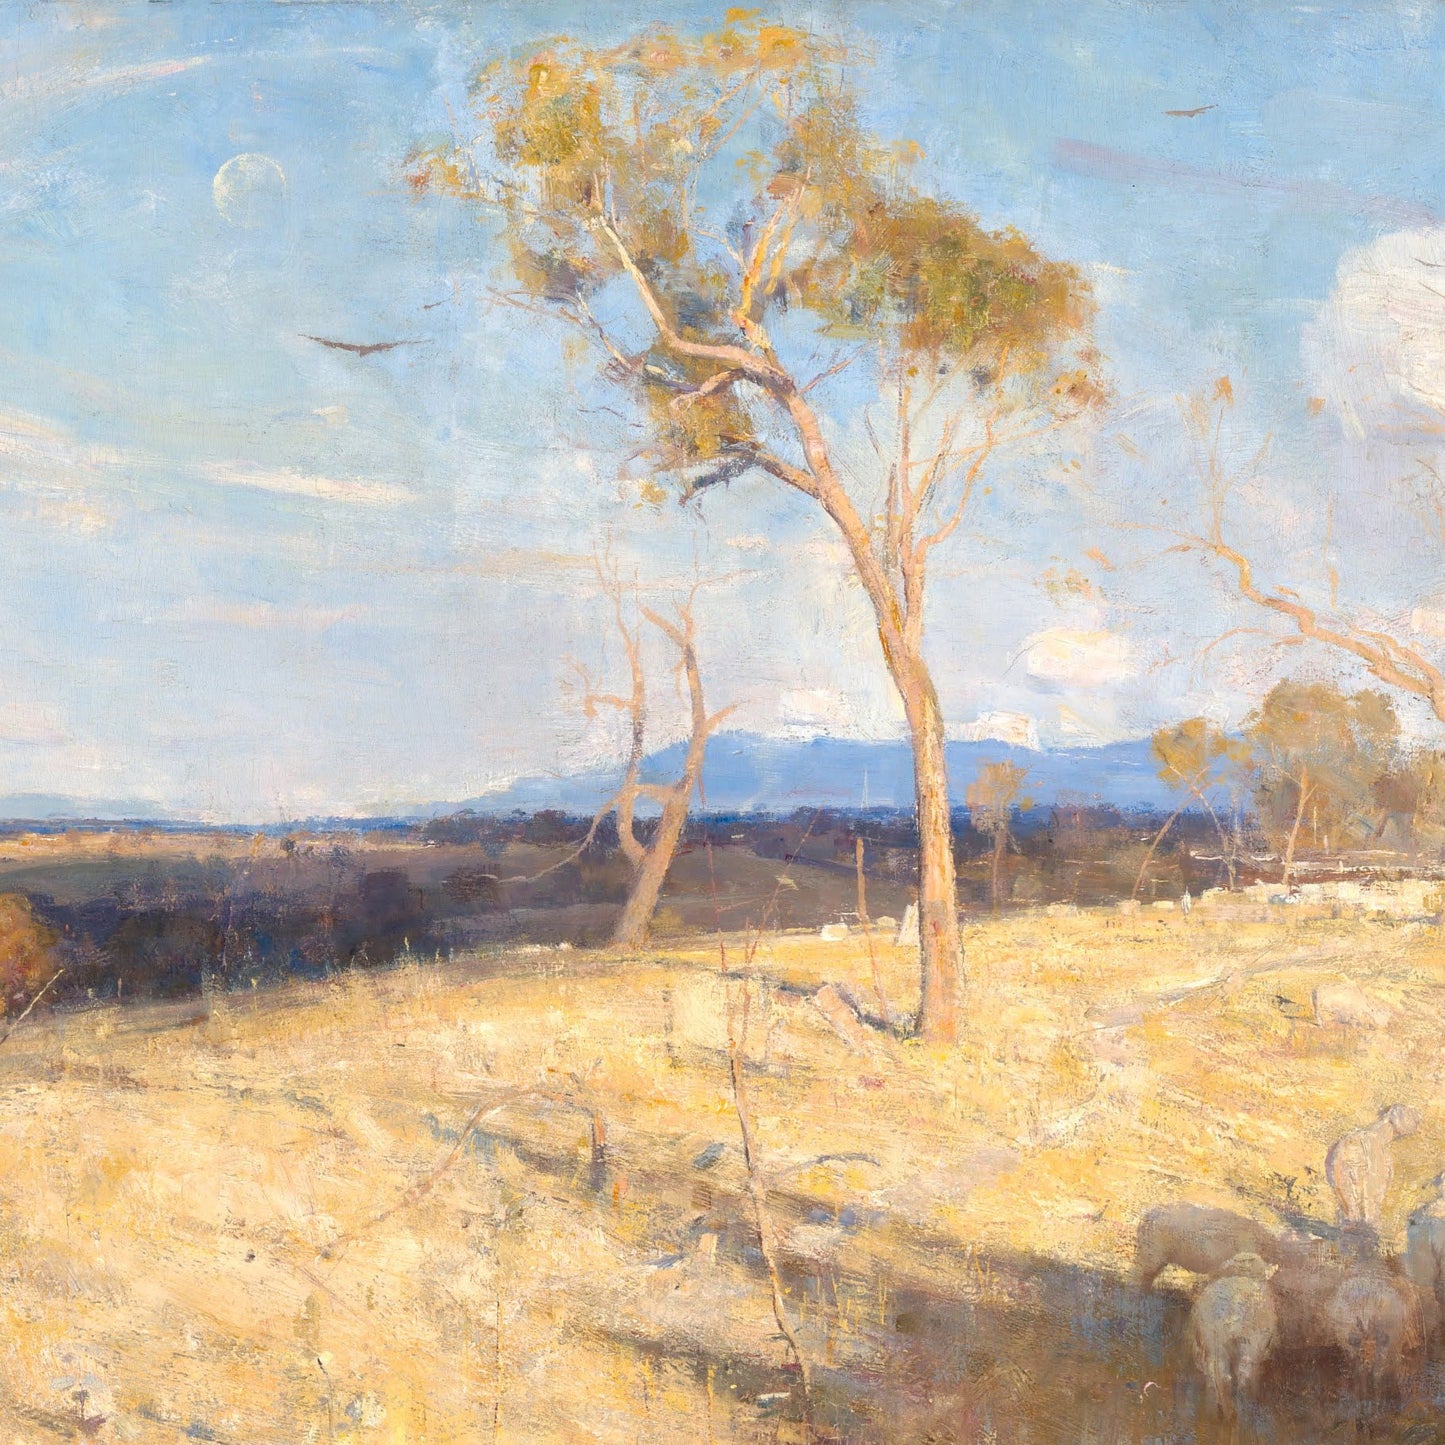 Golden Summer Eaglemont by Arthur Streeton, 3d Printed with texture and brush strokes looks like original oil-painting, code:129